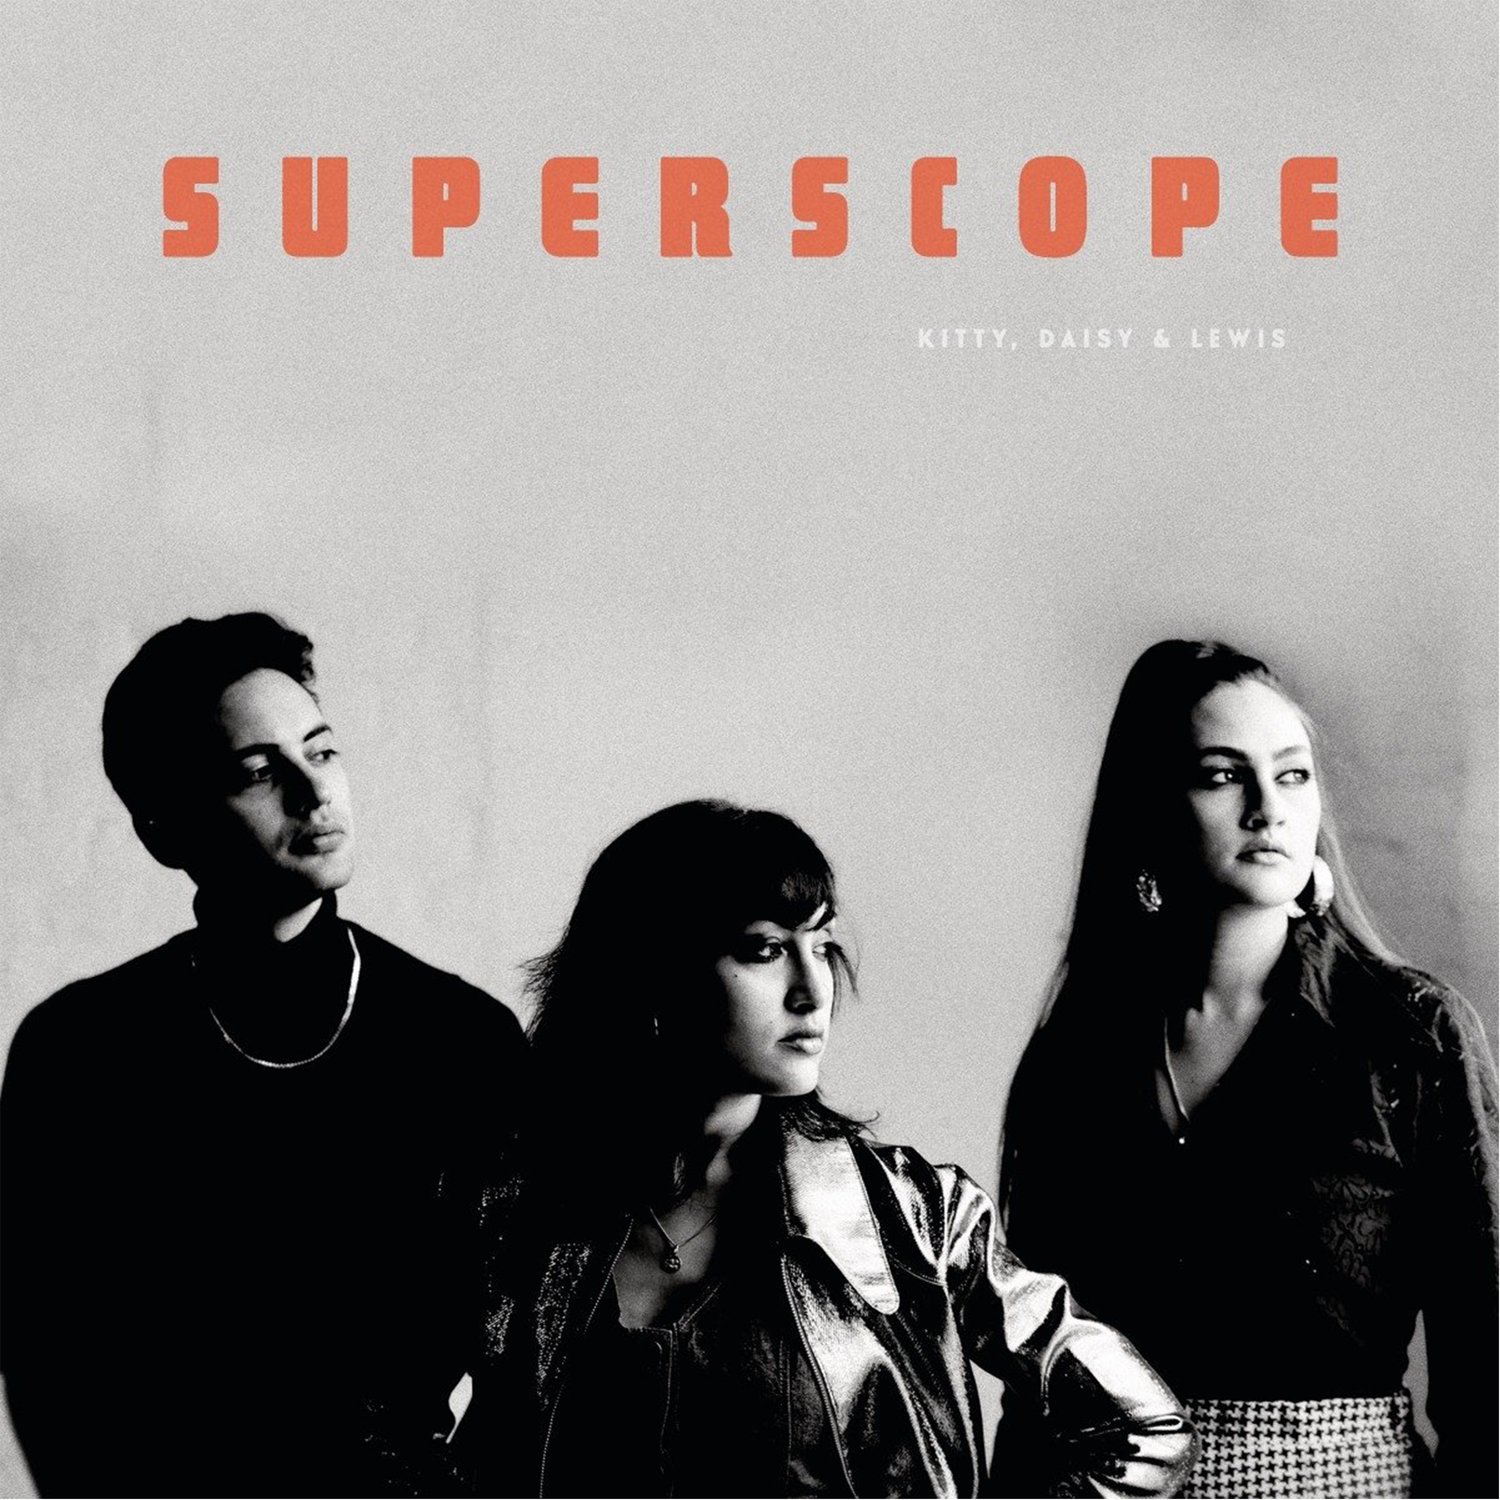 Image of Kitty Daisy & Lewis - Superscope